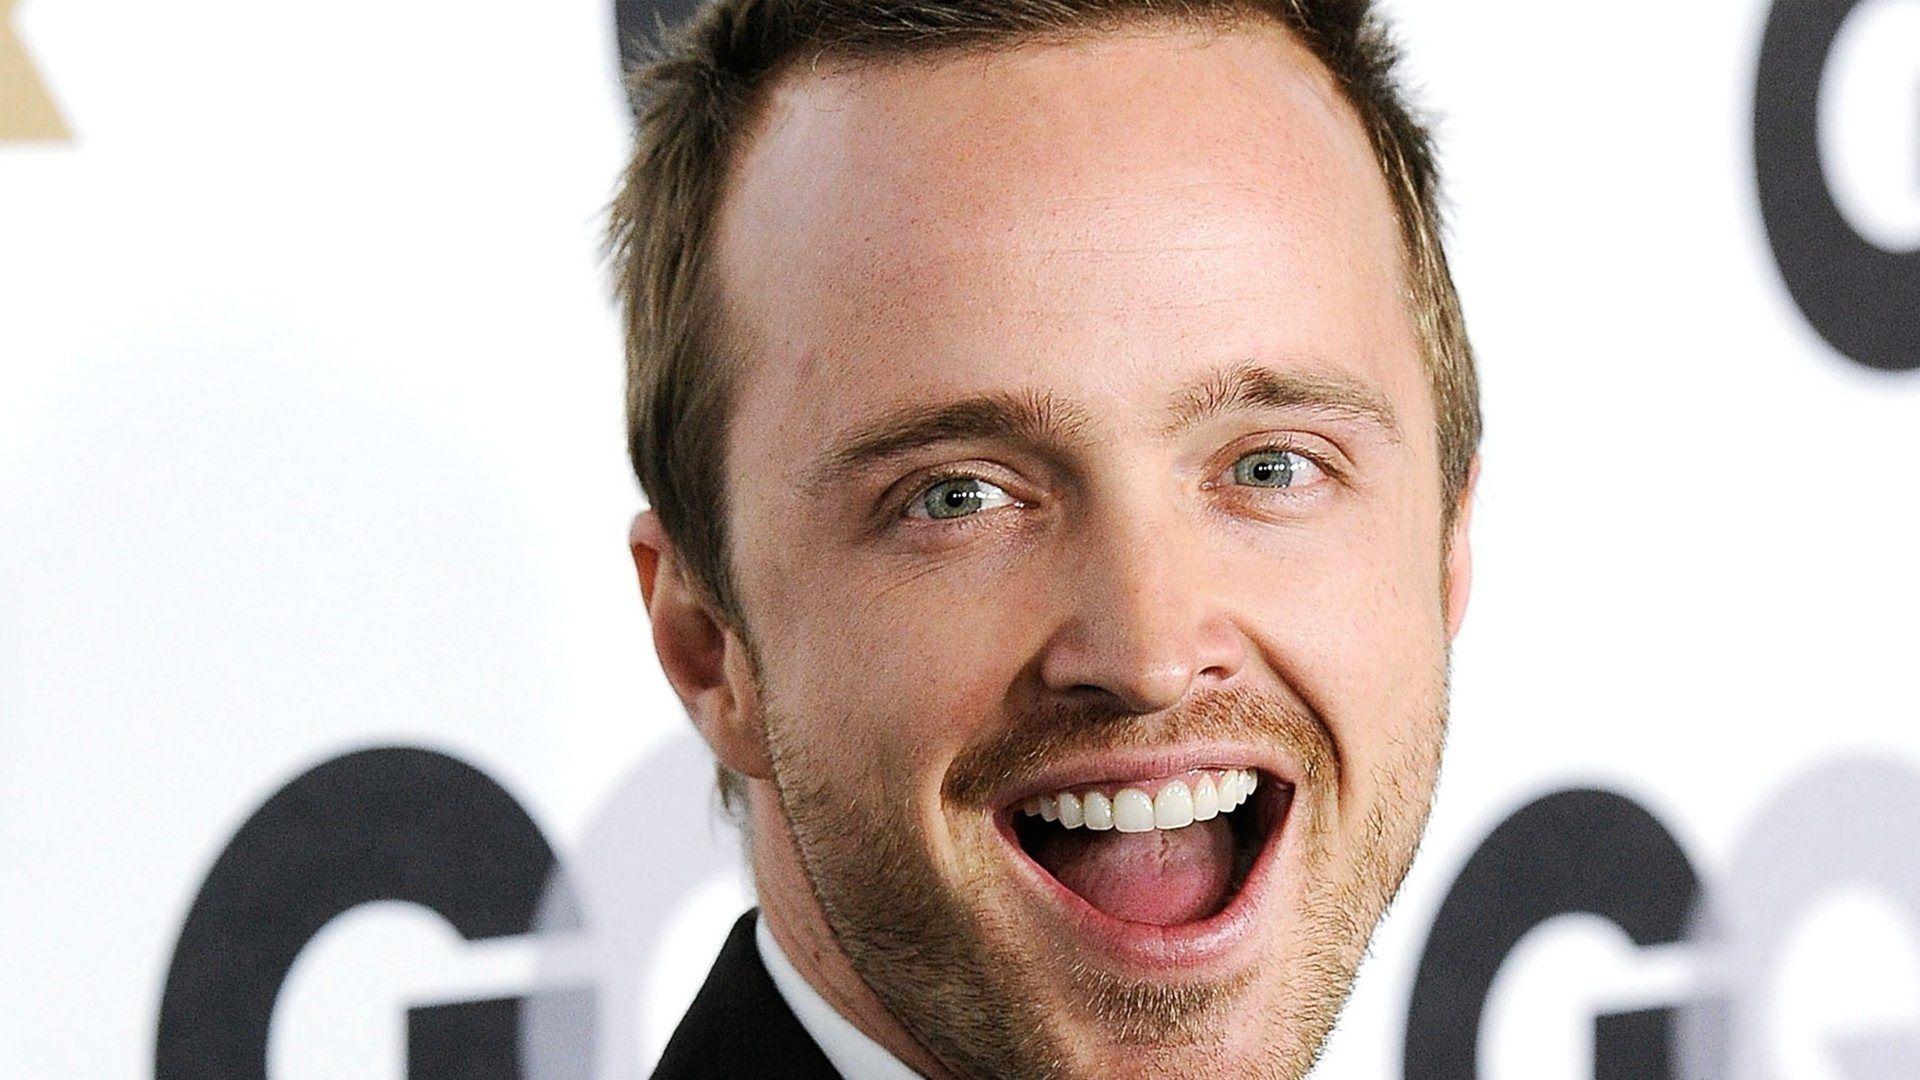 Aaron Paul Wallpaper Image Photo Picture Background